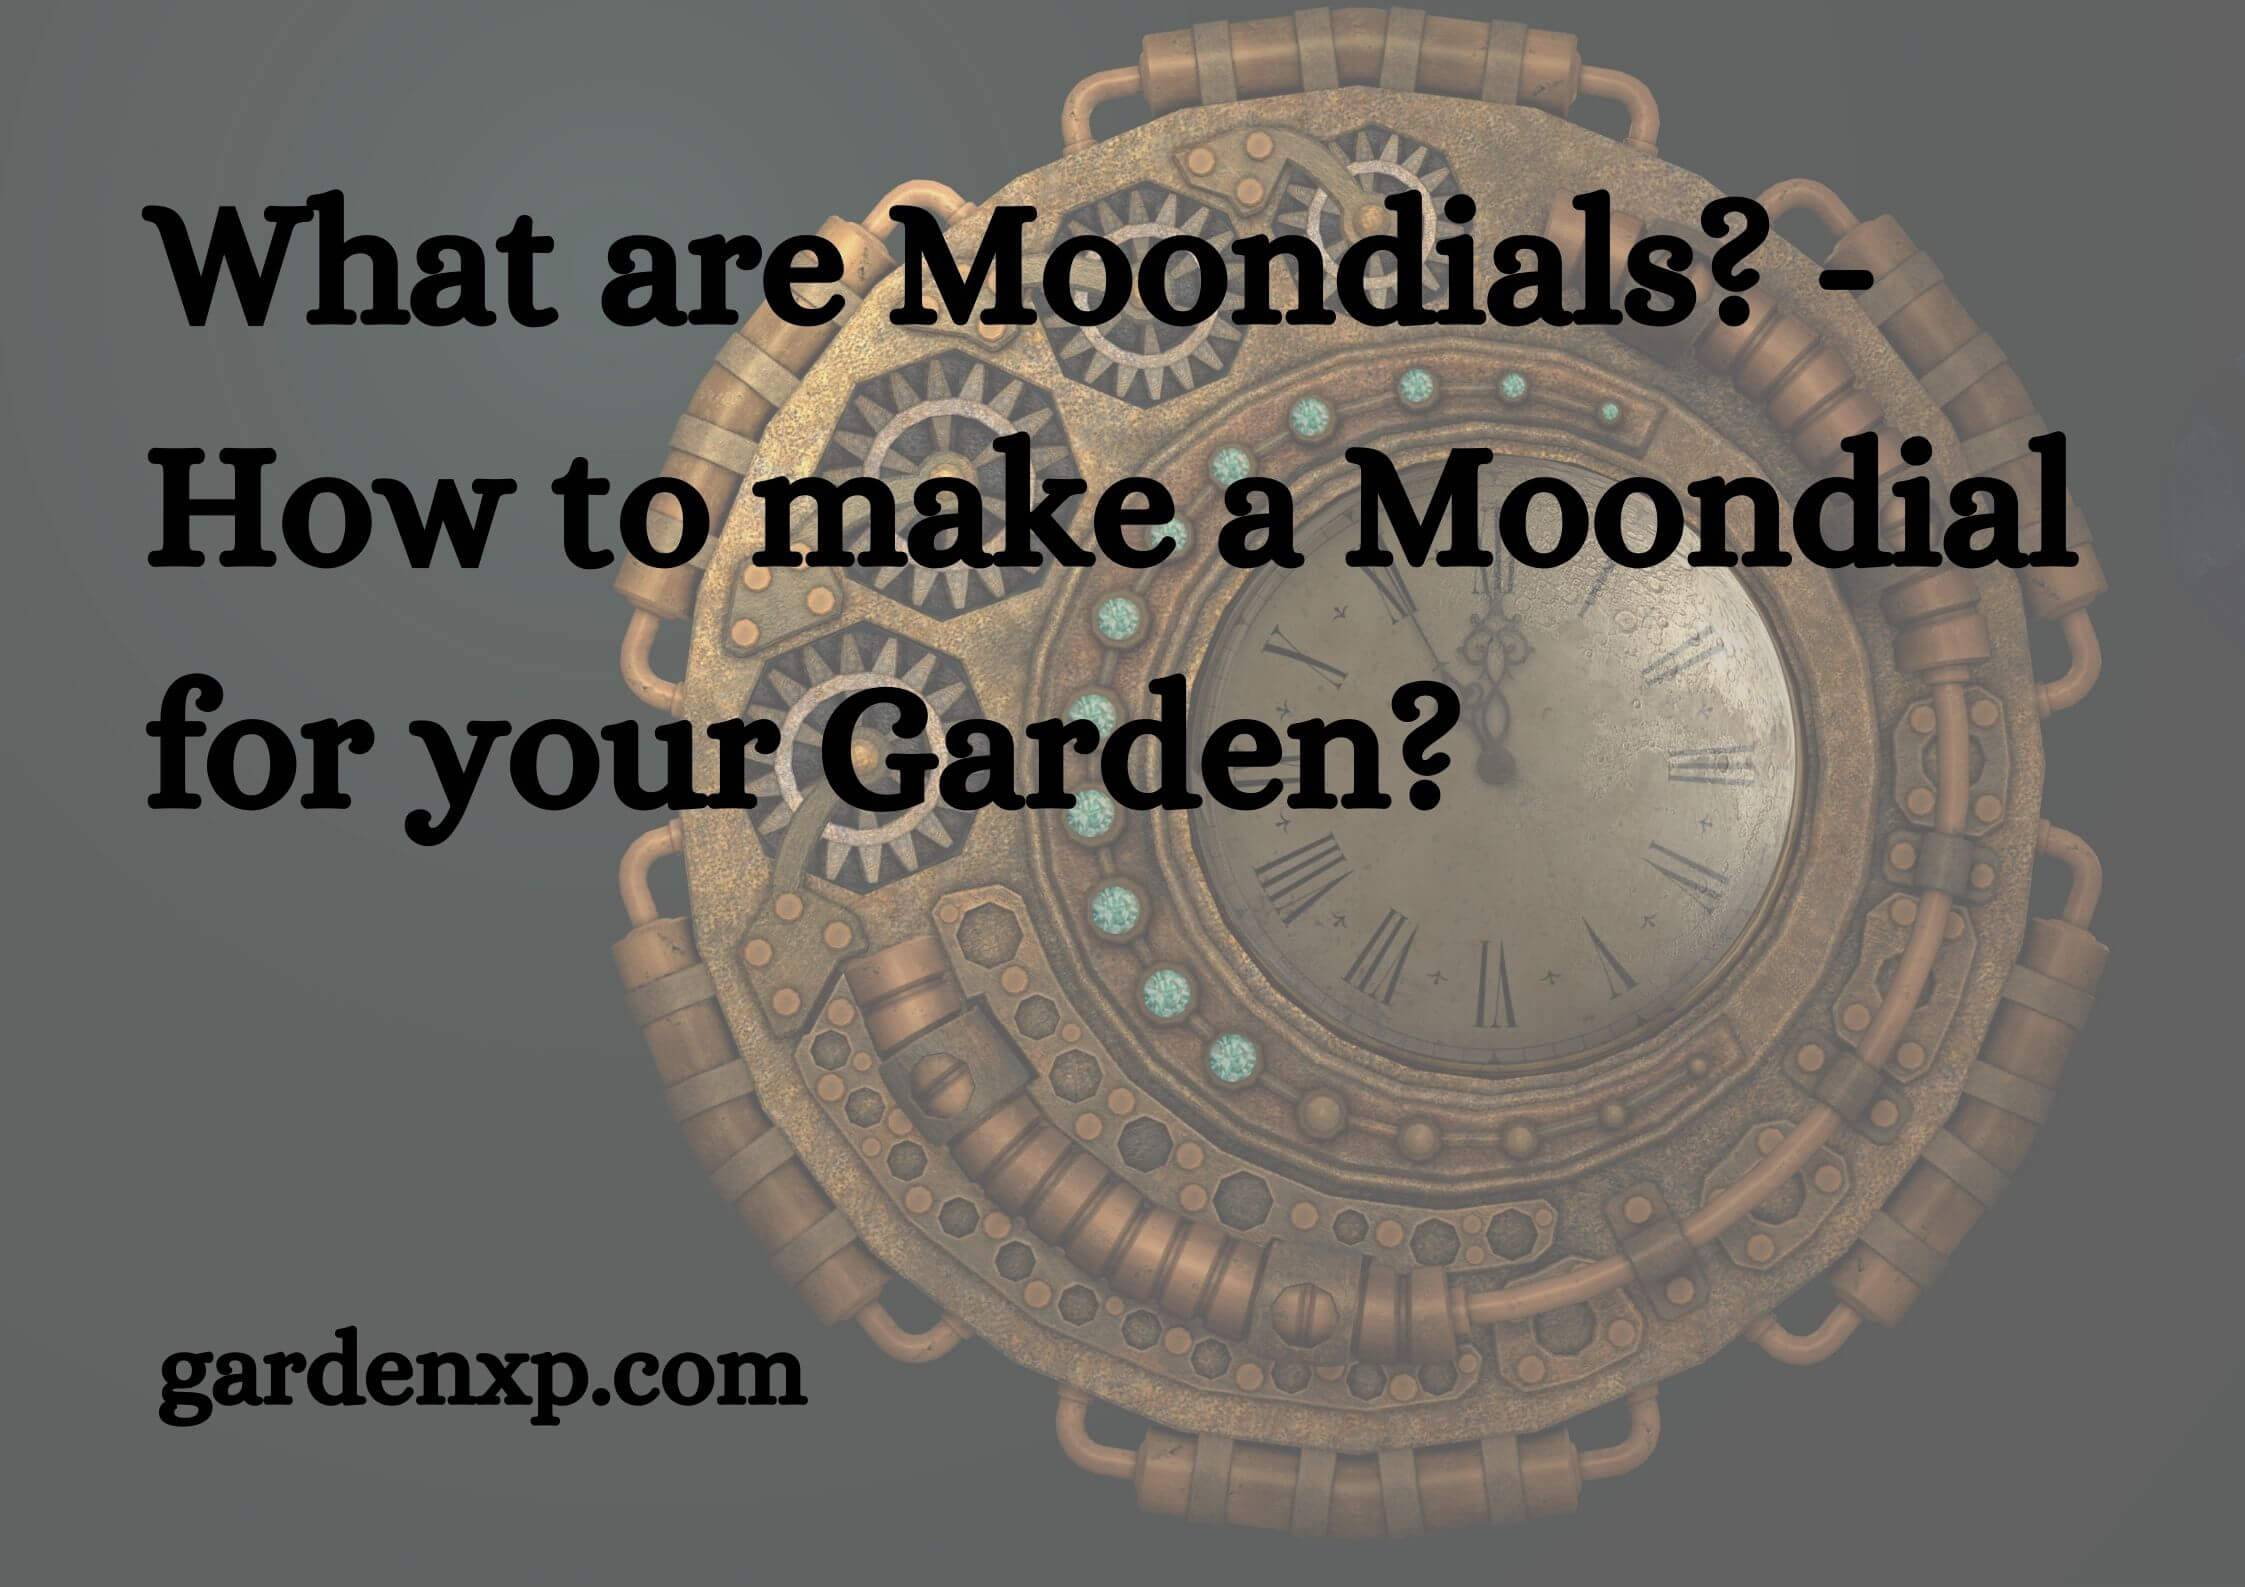 What are Moondials? - How to make a Moondial for your Garden?